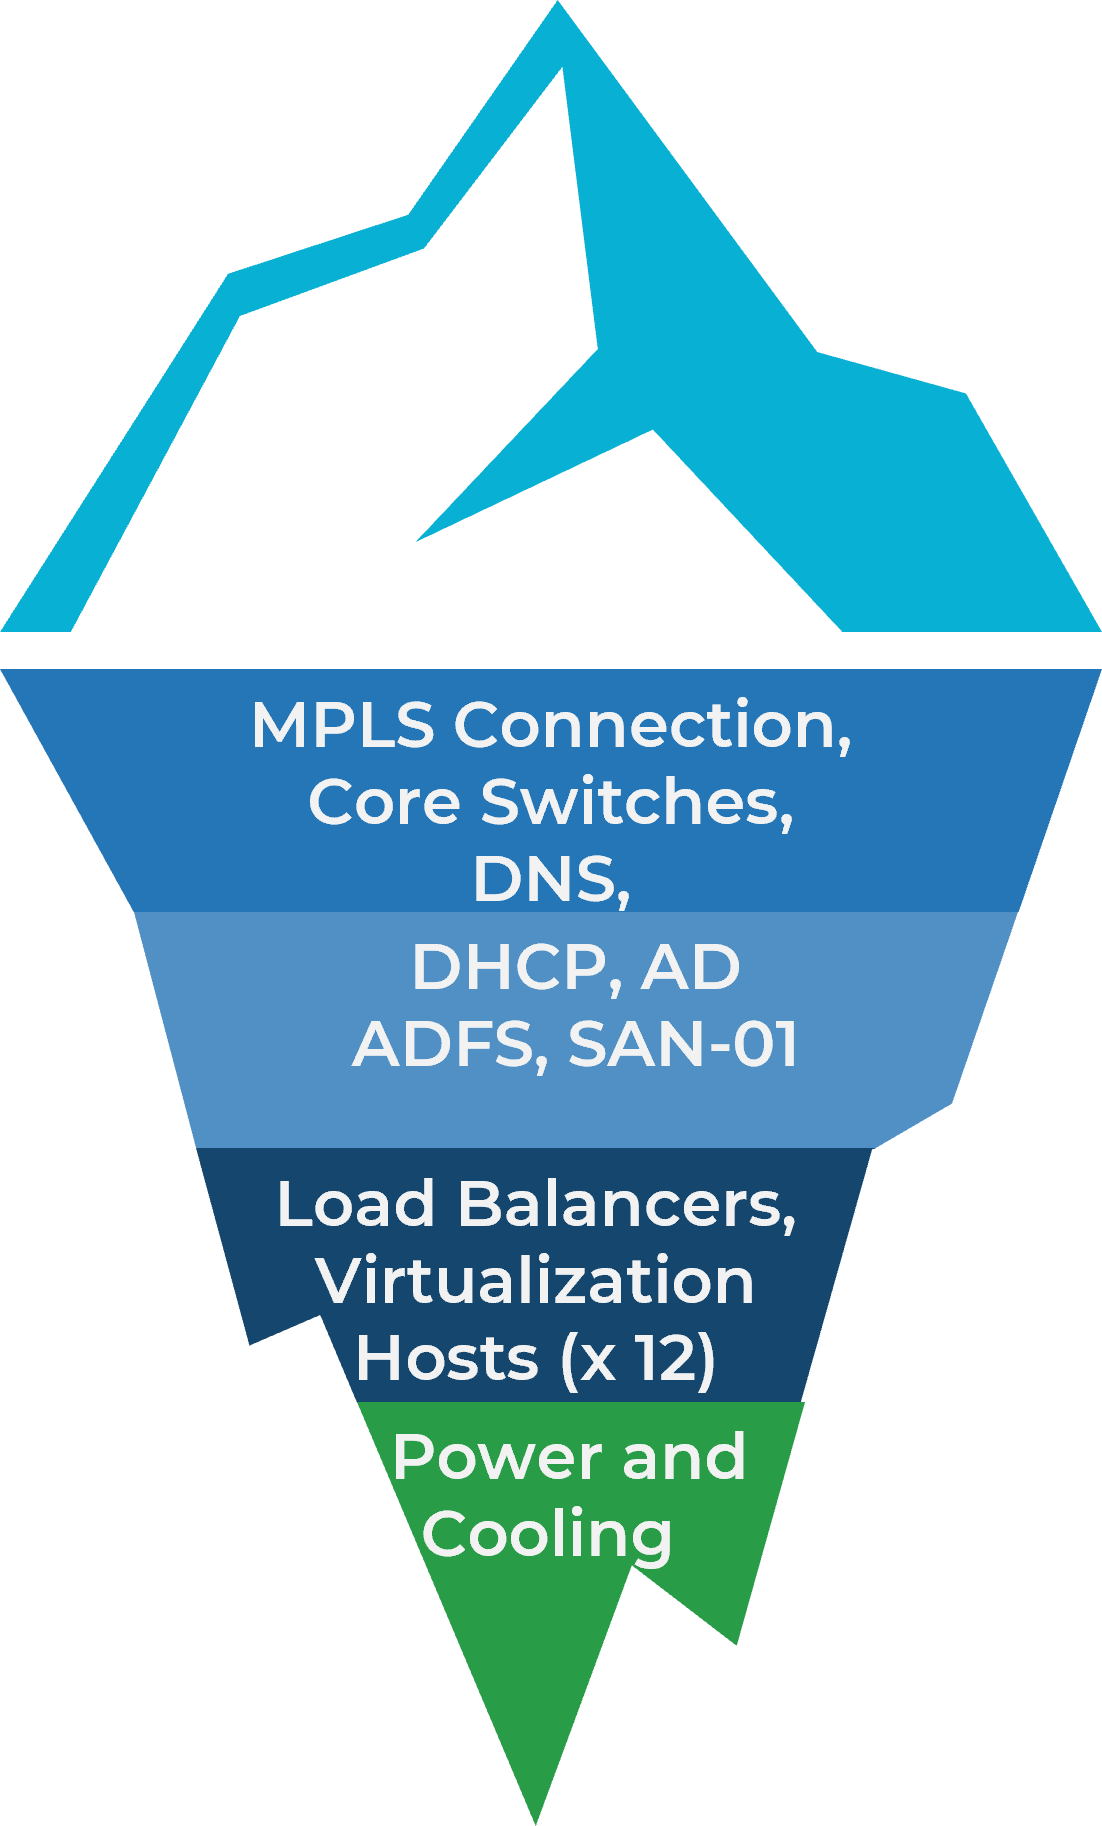 An iceberg is depicted. below the surface, are the following terms in order from shallowest to deepest: MPLS Connection, Core Switches, DNS; DHCP, AD ADFS, SAN-01; Load Balancers, Virtualization Hosts (x 12); Power and Cooling